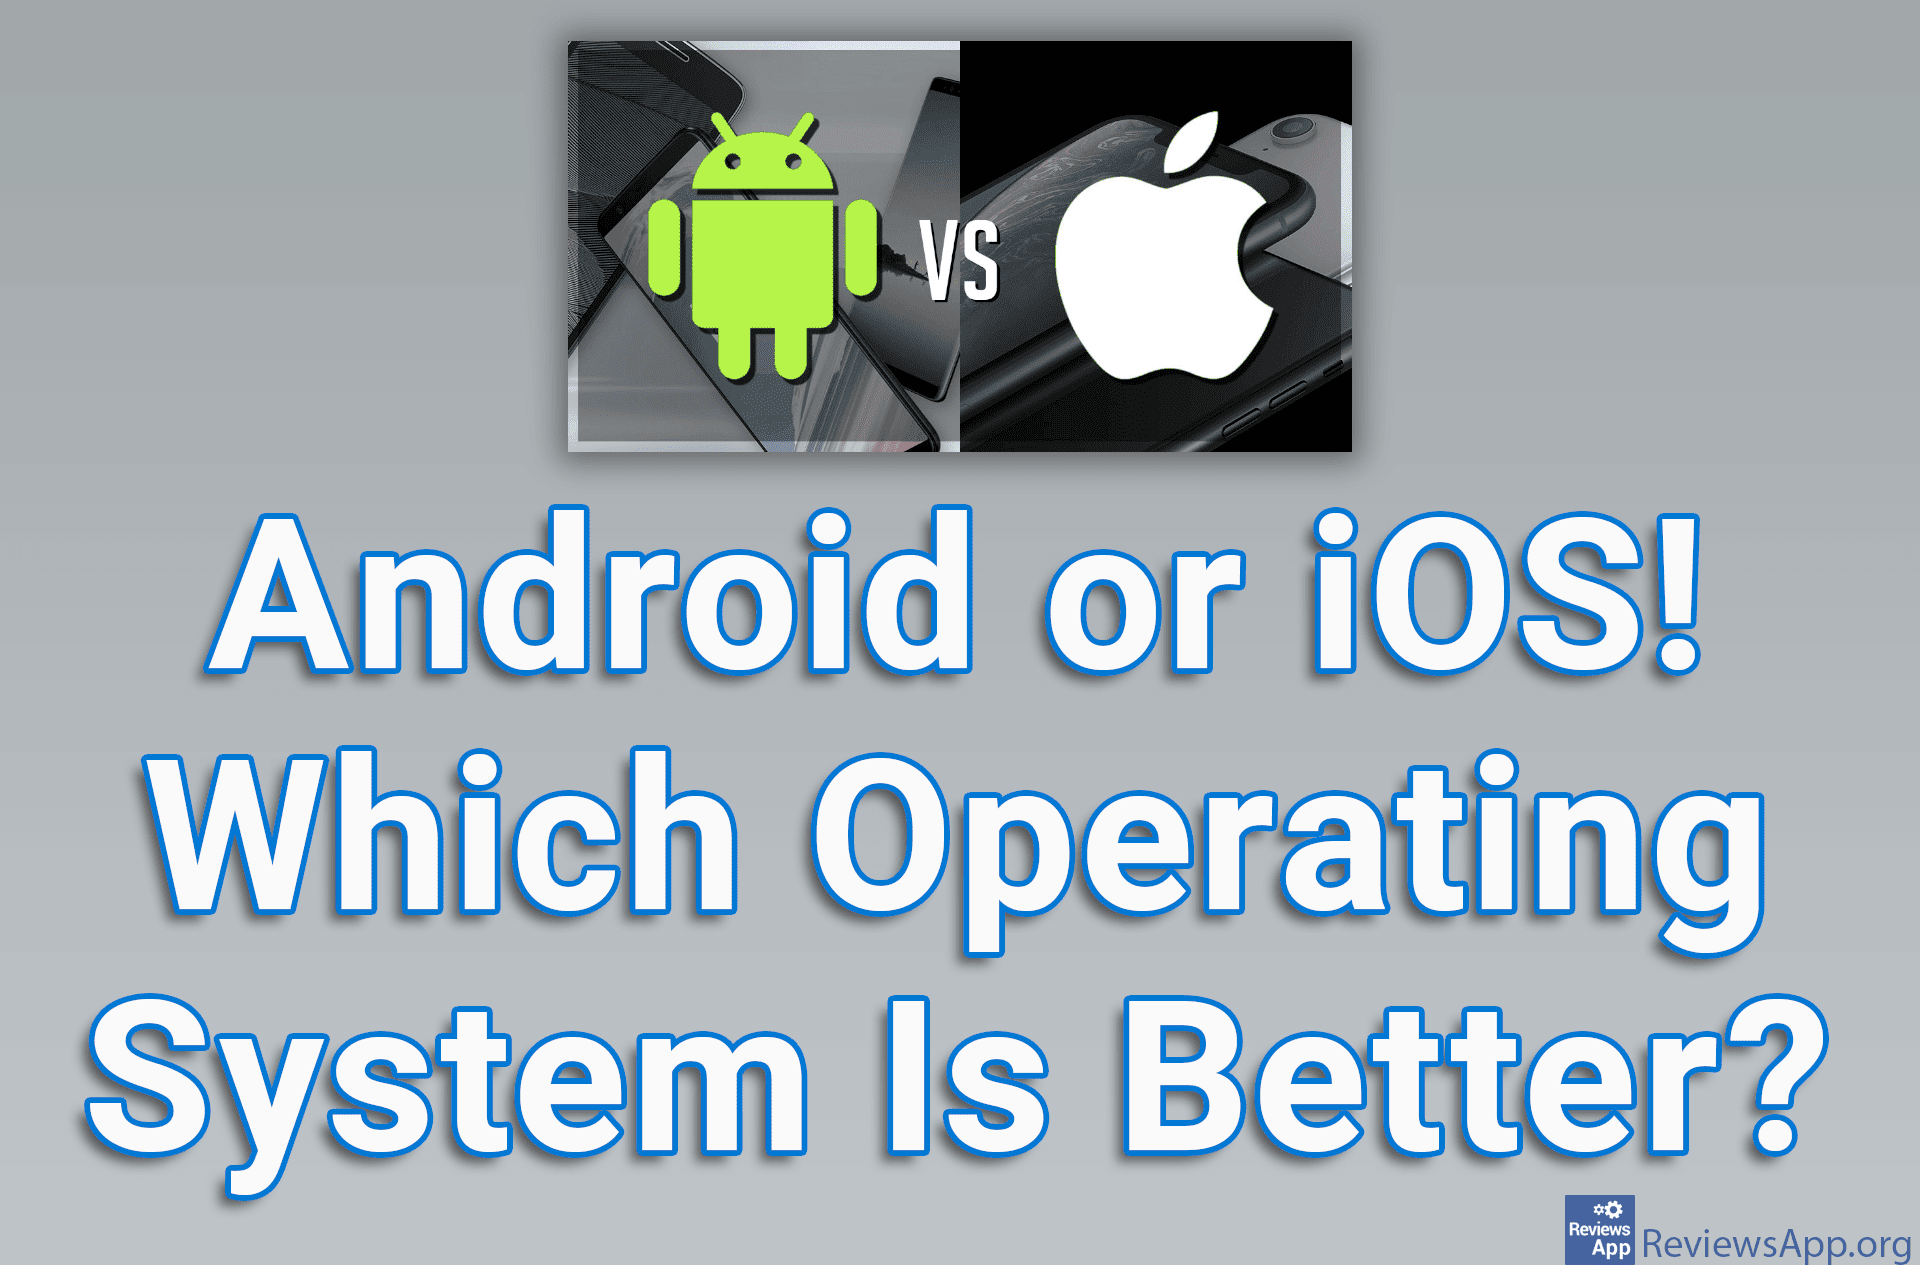 Android or iOS, Which Operating System Is Better?